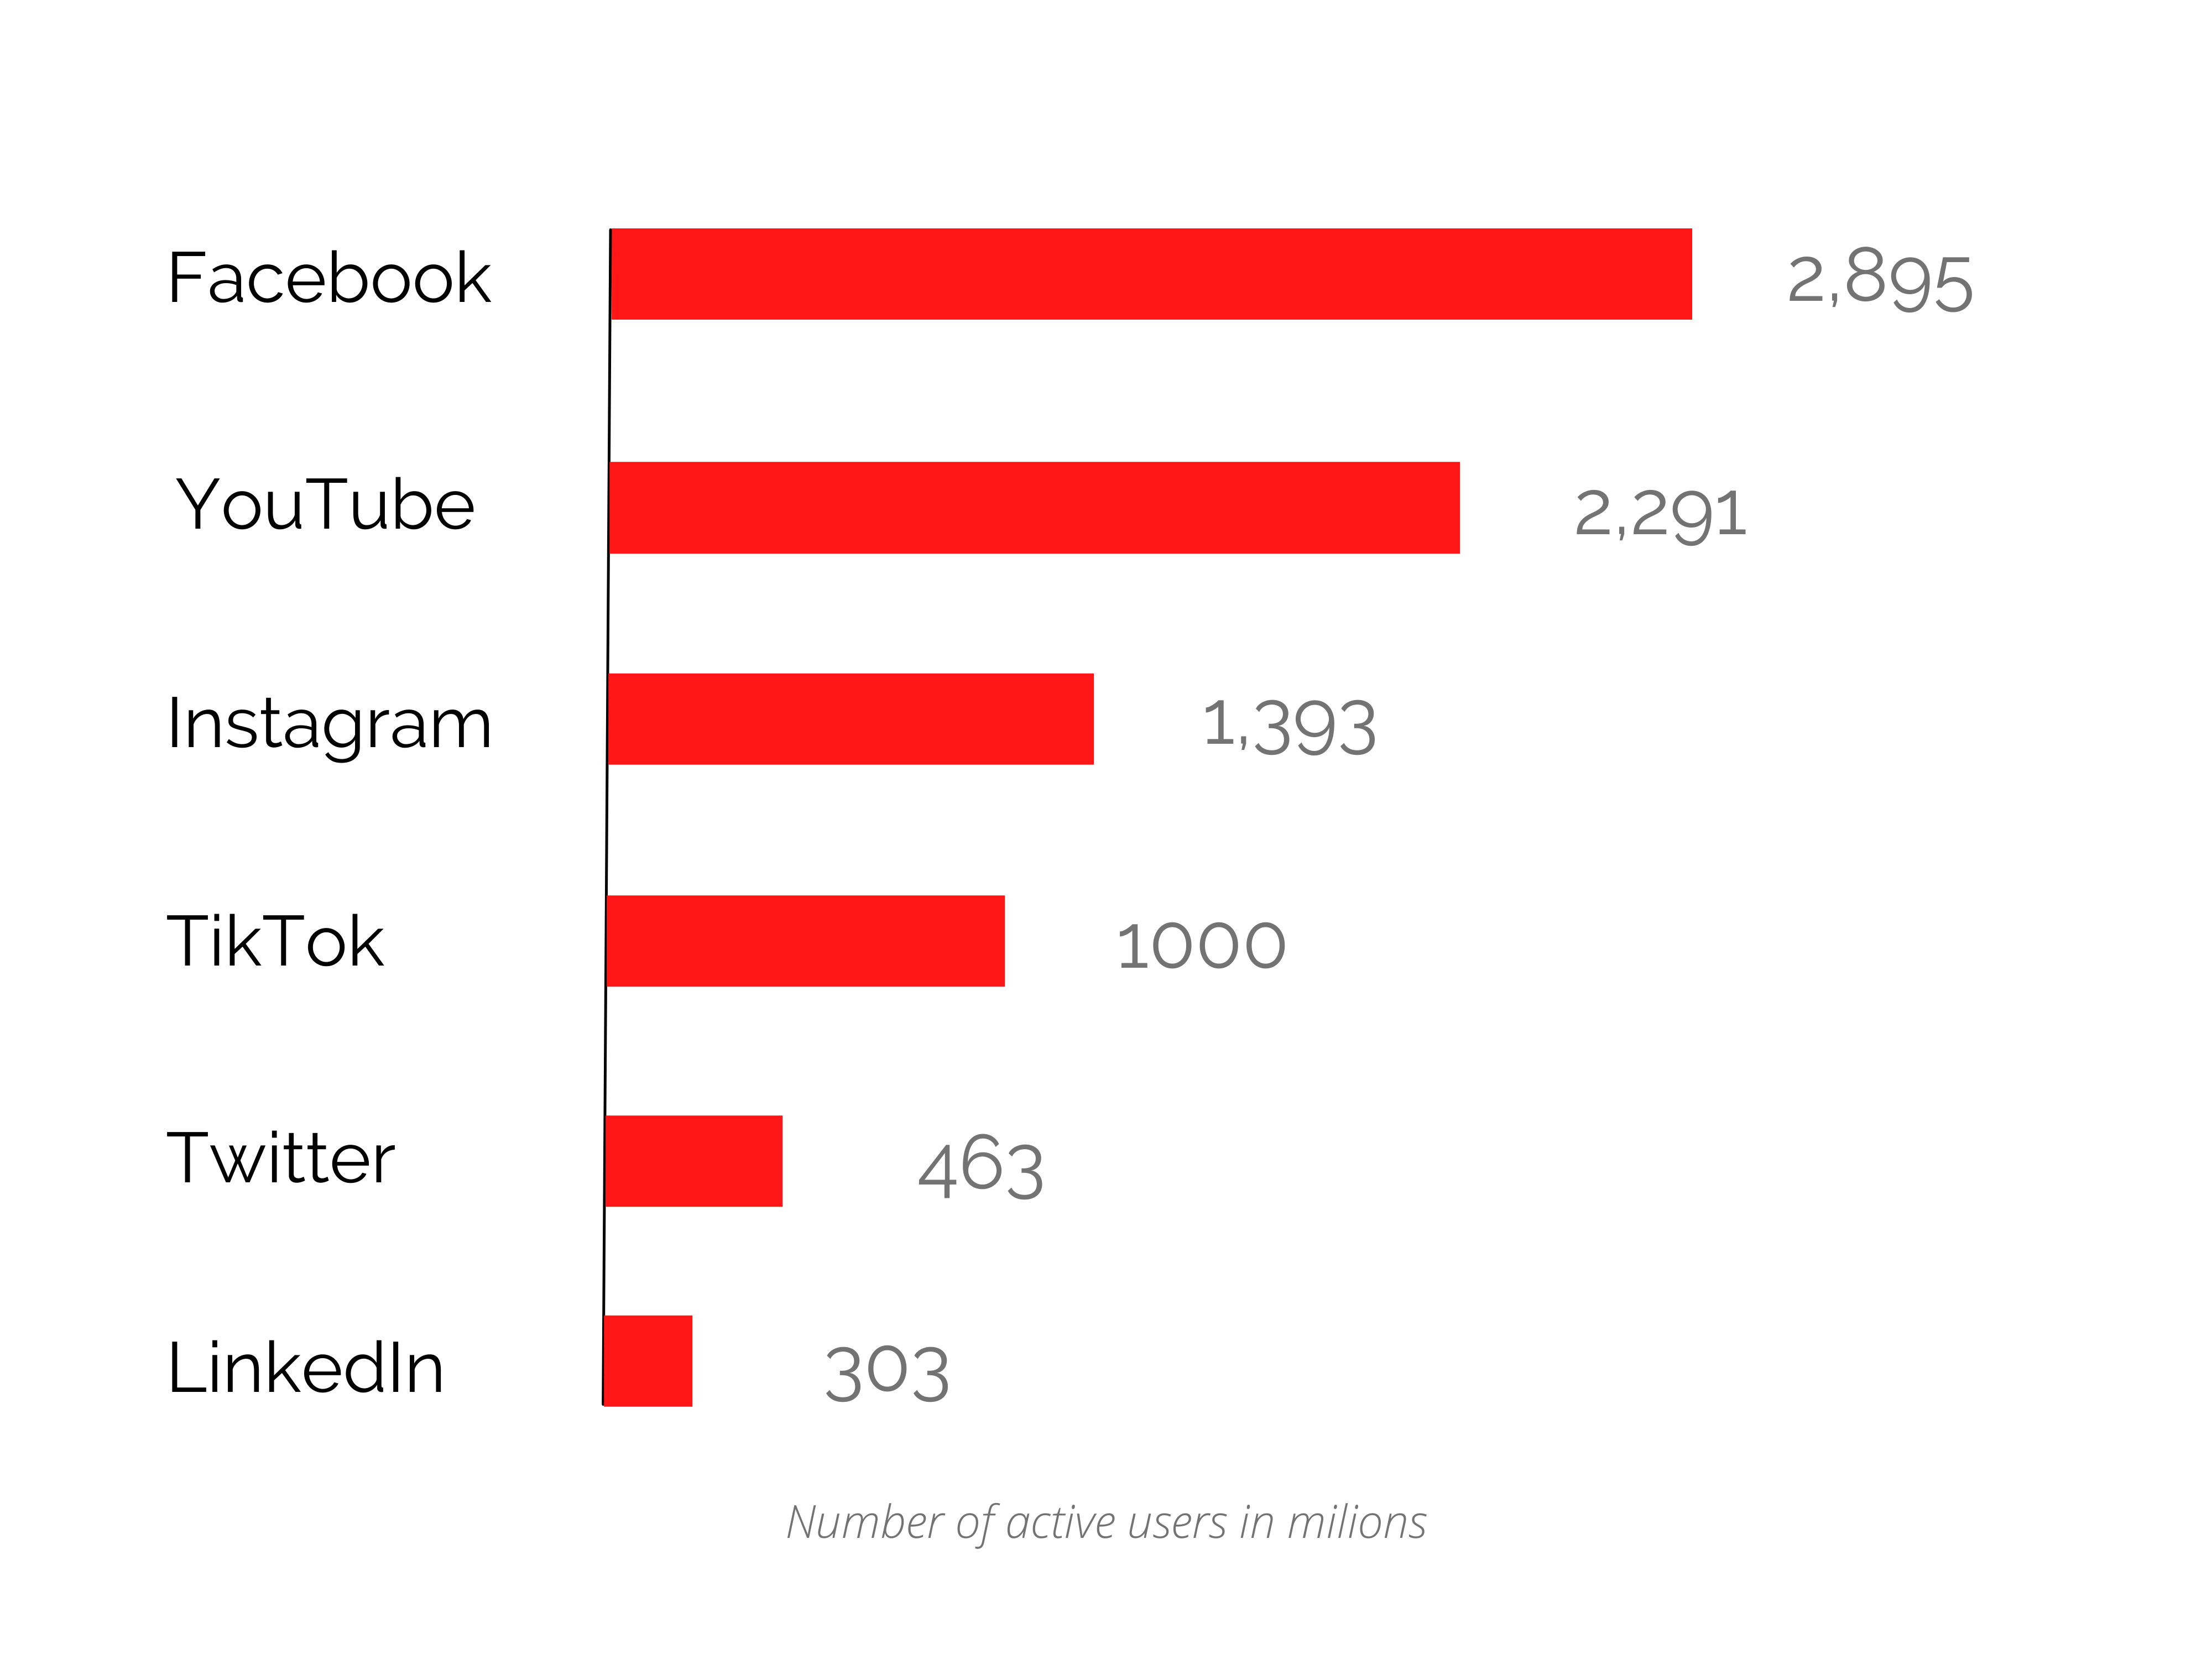 Number of active users in millions on most popular Social Media platforms